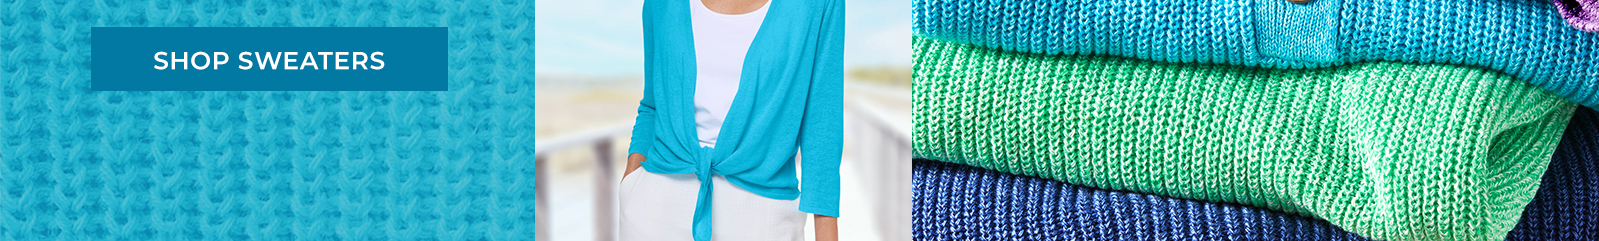 light & bright add a splash of color with our lightweight sweaters. shop sweaters